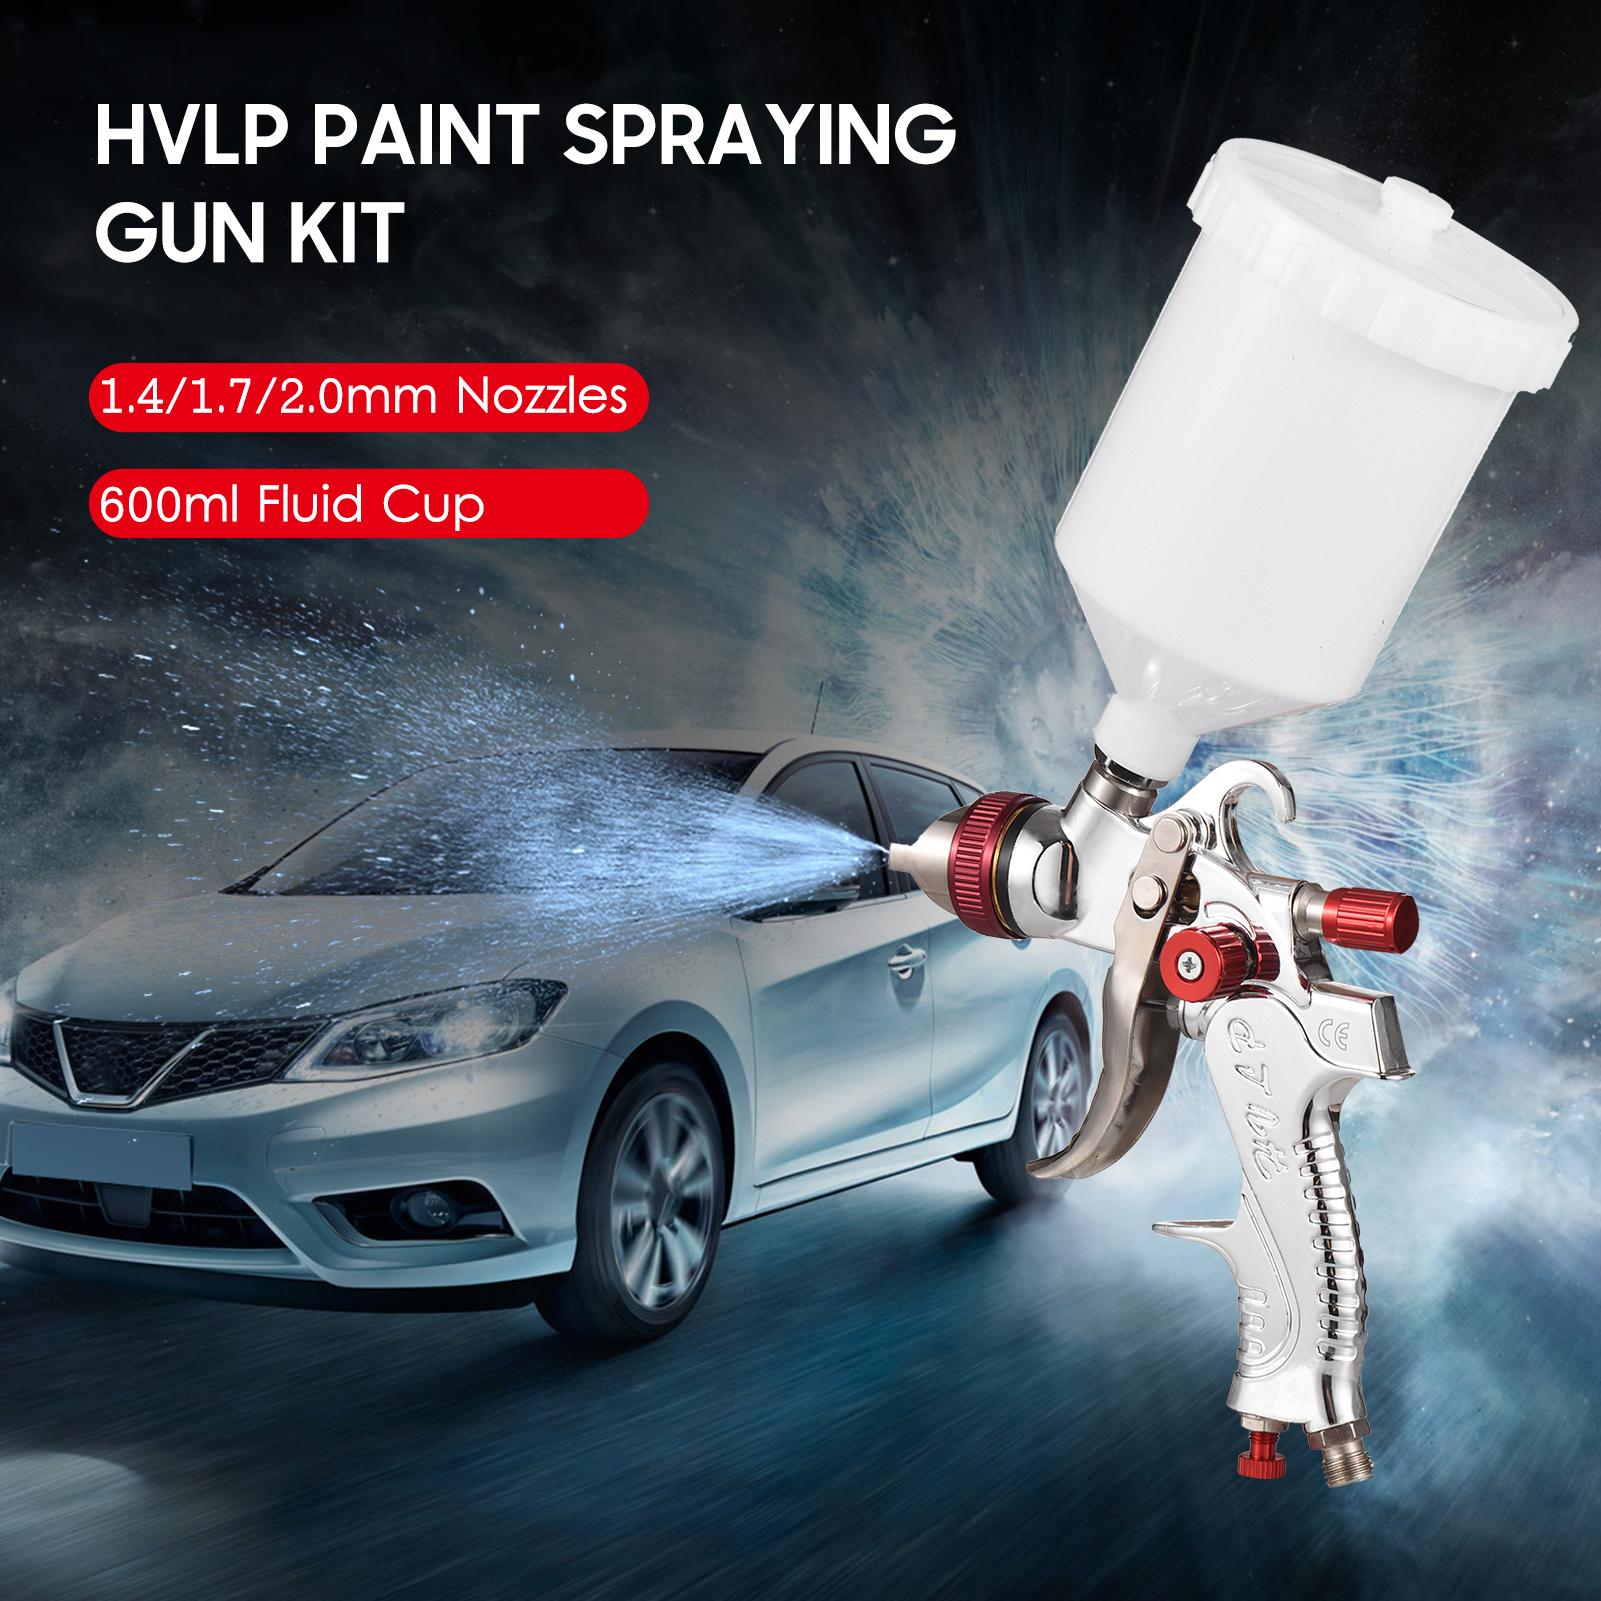 HVLP Paint Spraying Gun Kit Gravity Feed Air Spray Gun Mini Sprayer Paint Gun Paint Sprayer with 600ml Cup 1.4/1.7/2.0mm Nozzles for Painting Car Furniture Wall